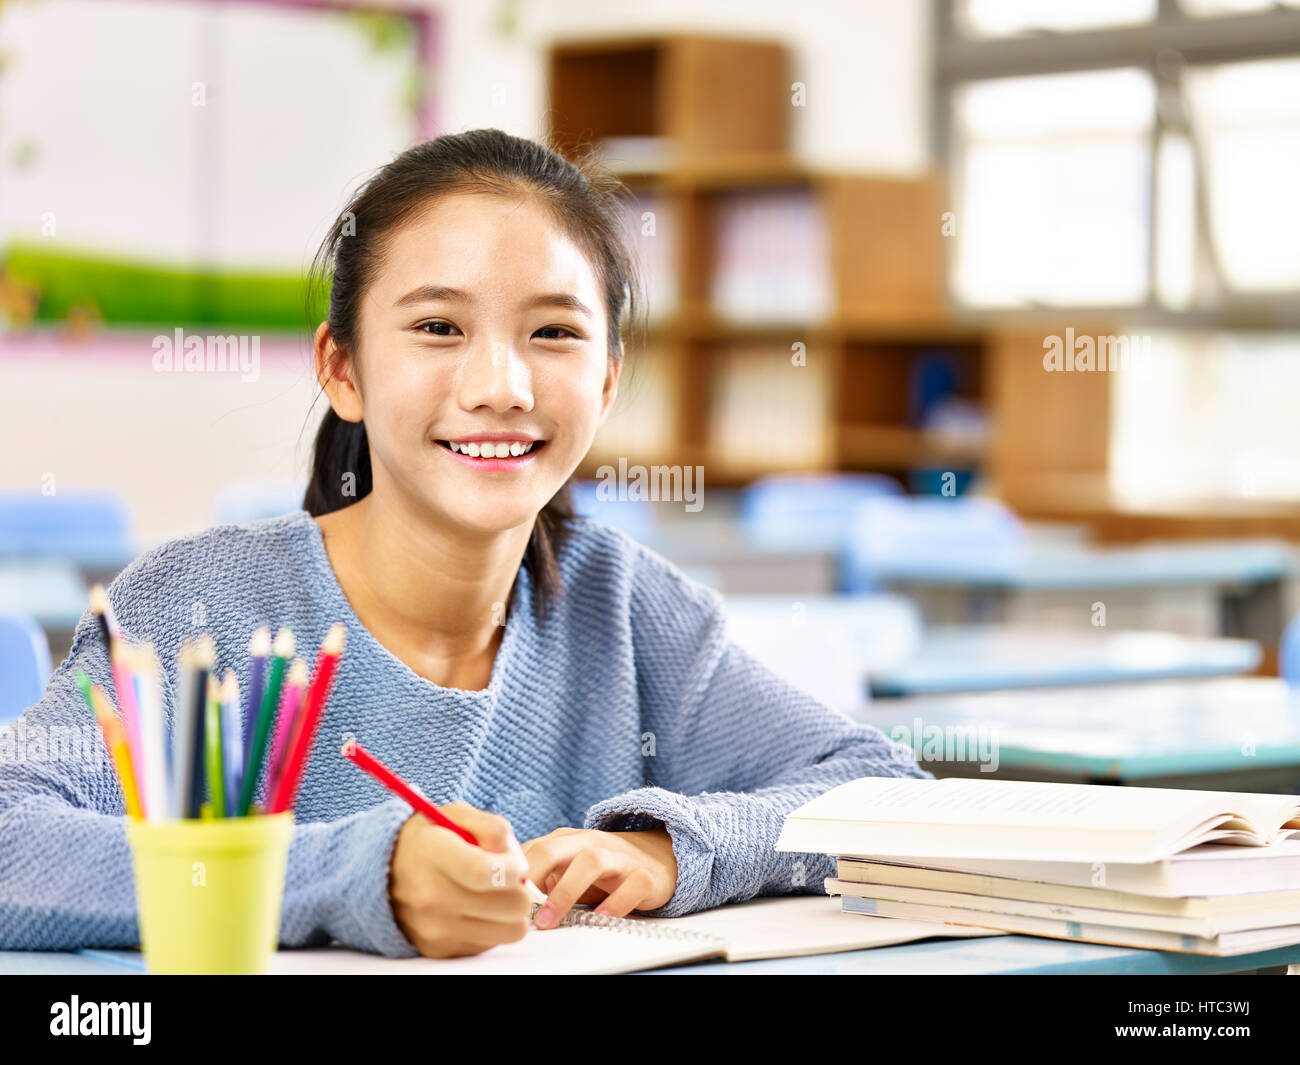 happy asian elementary school student studying in classroom looking at camera smiling, Stock Photo